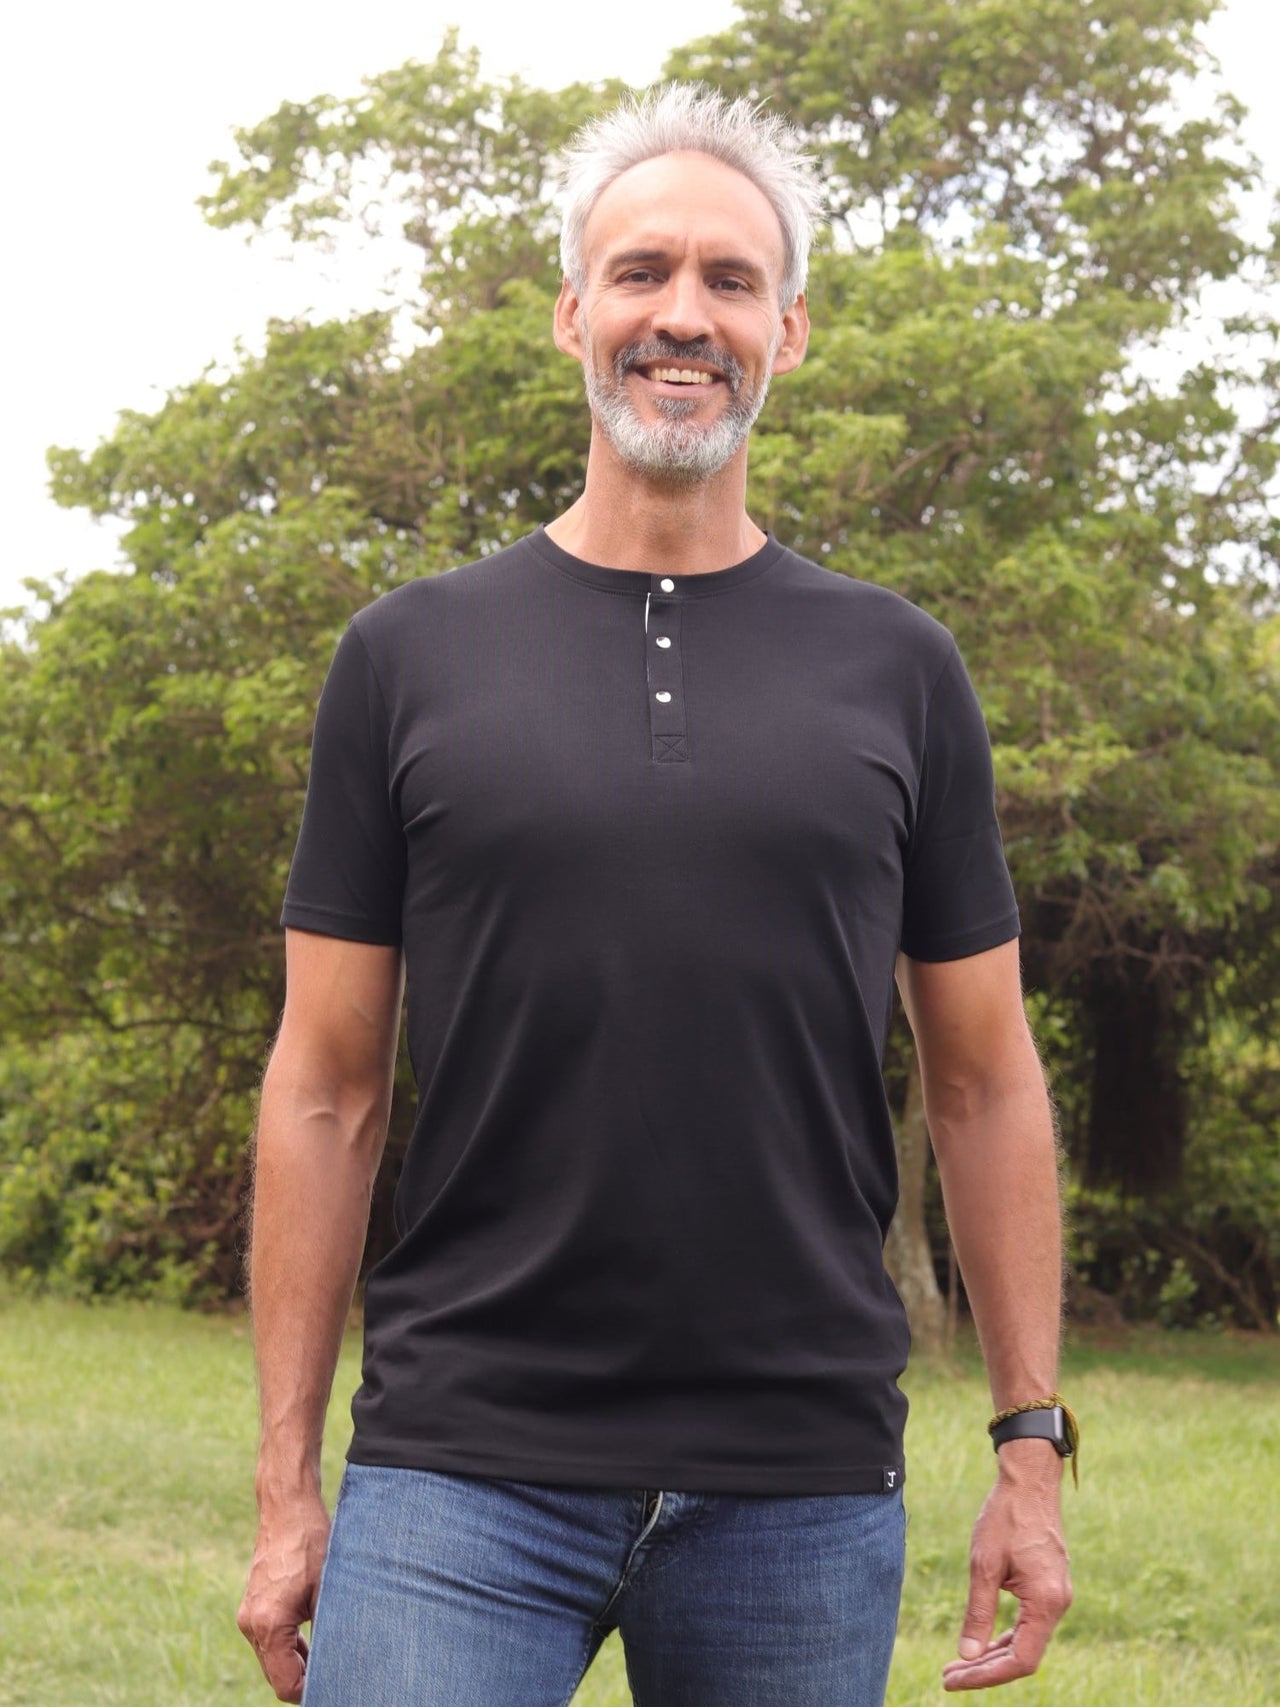 A tall skinny guy wearing a tall black henley shirt and laughing.